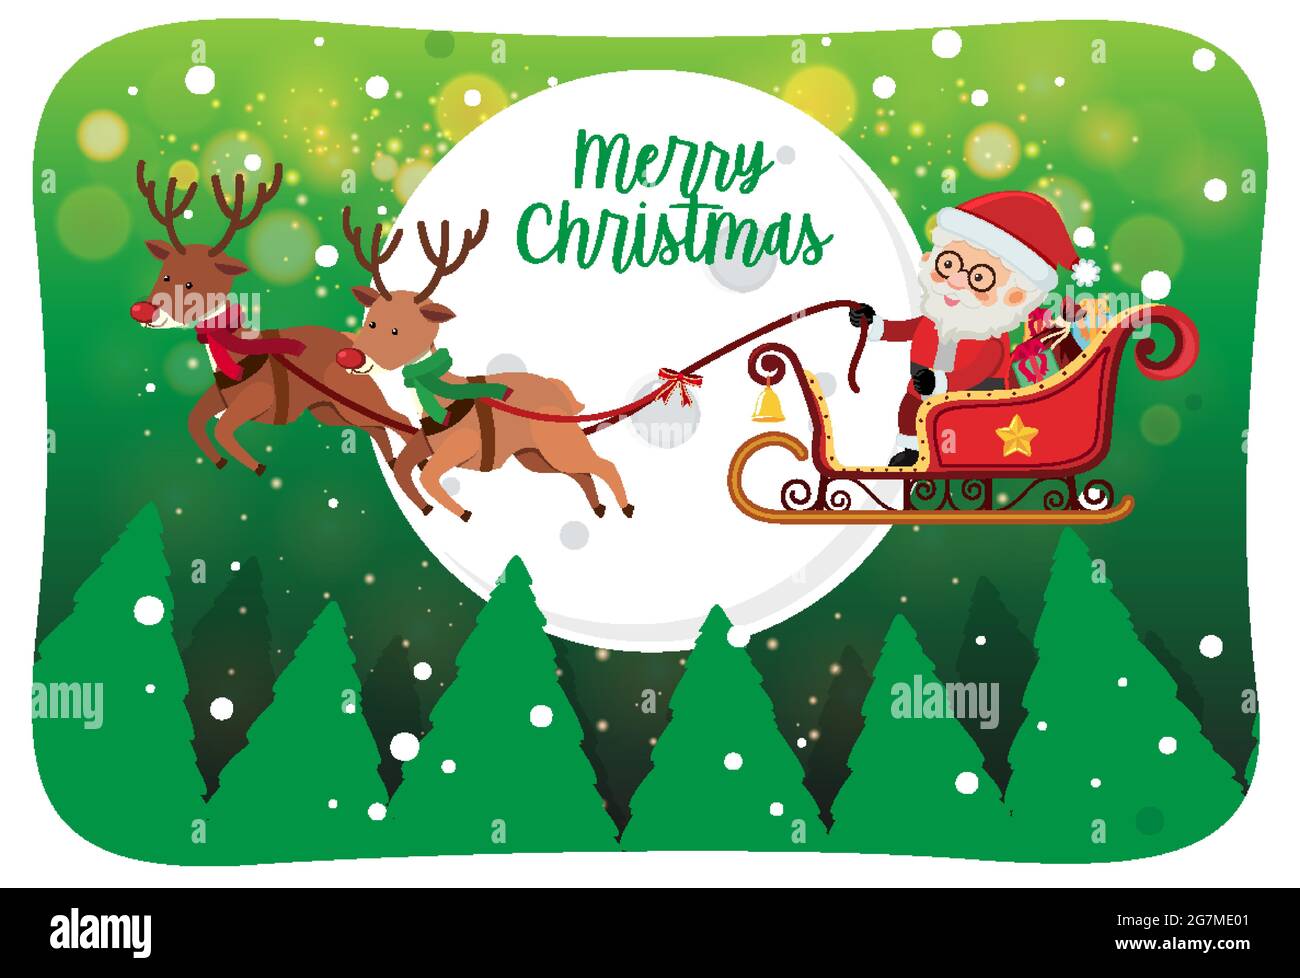 Merry Christmas font with Santa Claus on a sleigh in snow scene illustration Stock Vector